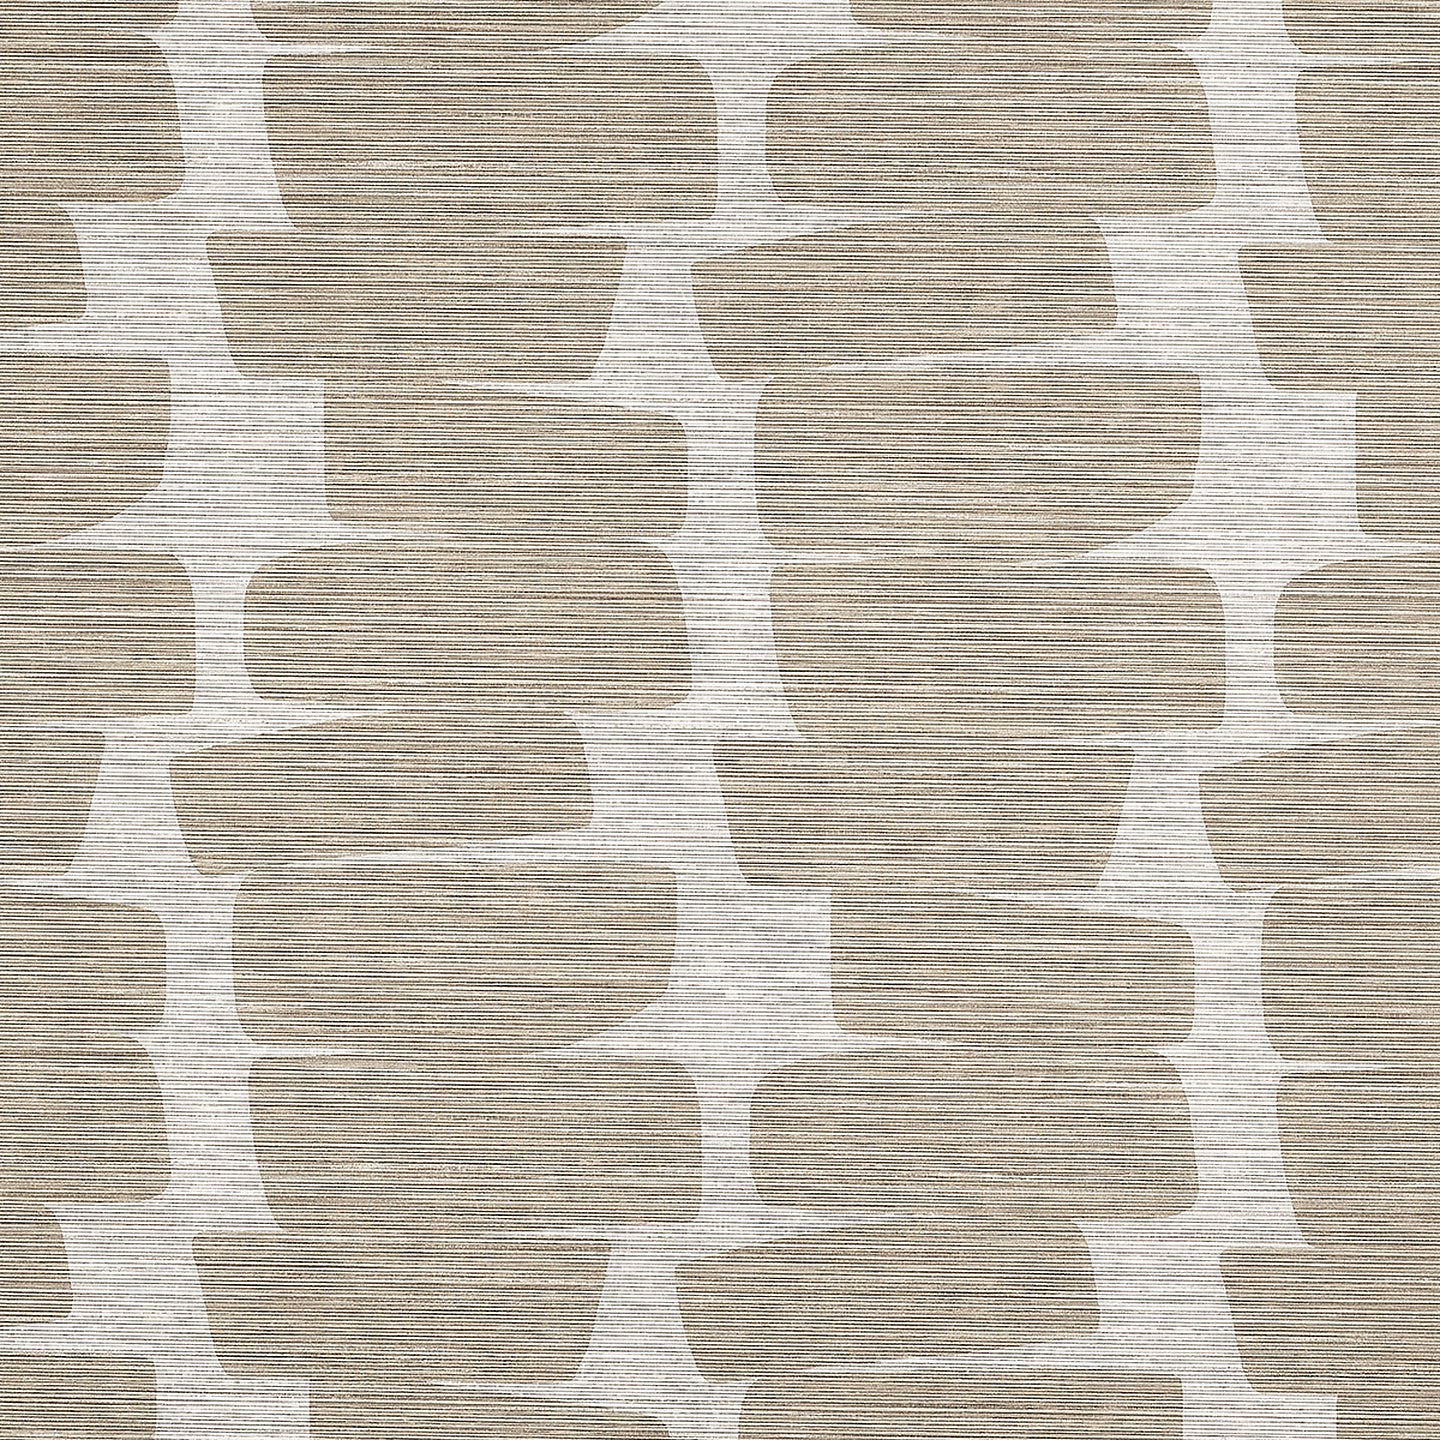 Purchase Phillip Jeffries Wallpaper - 10327, Vinyl Stacked - Taupe Tiers 